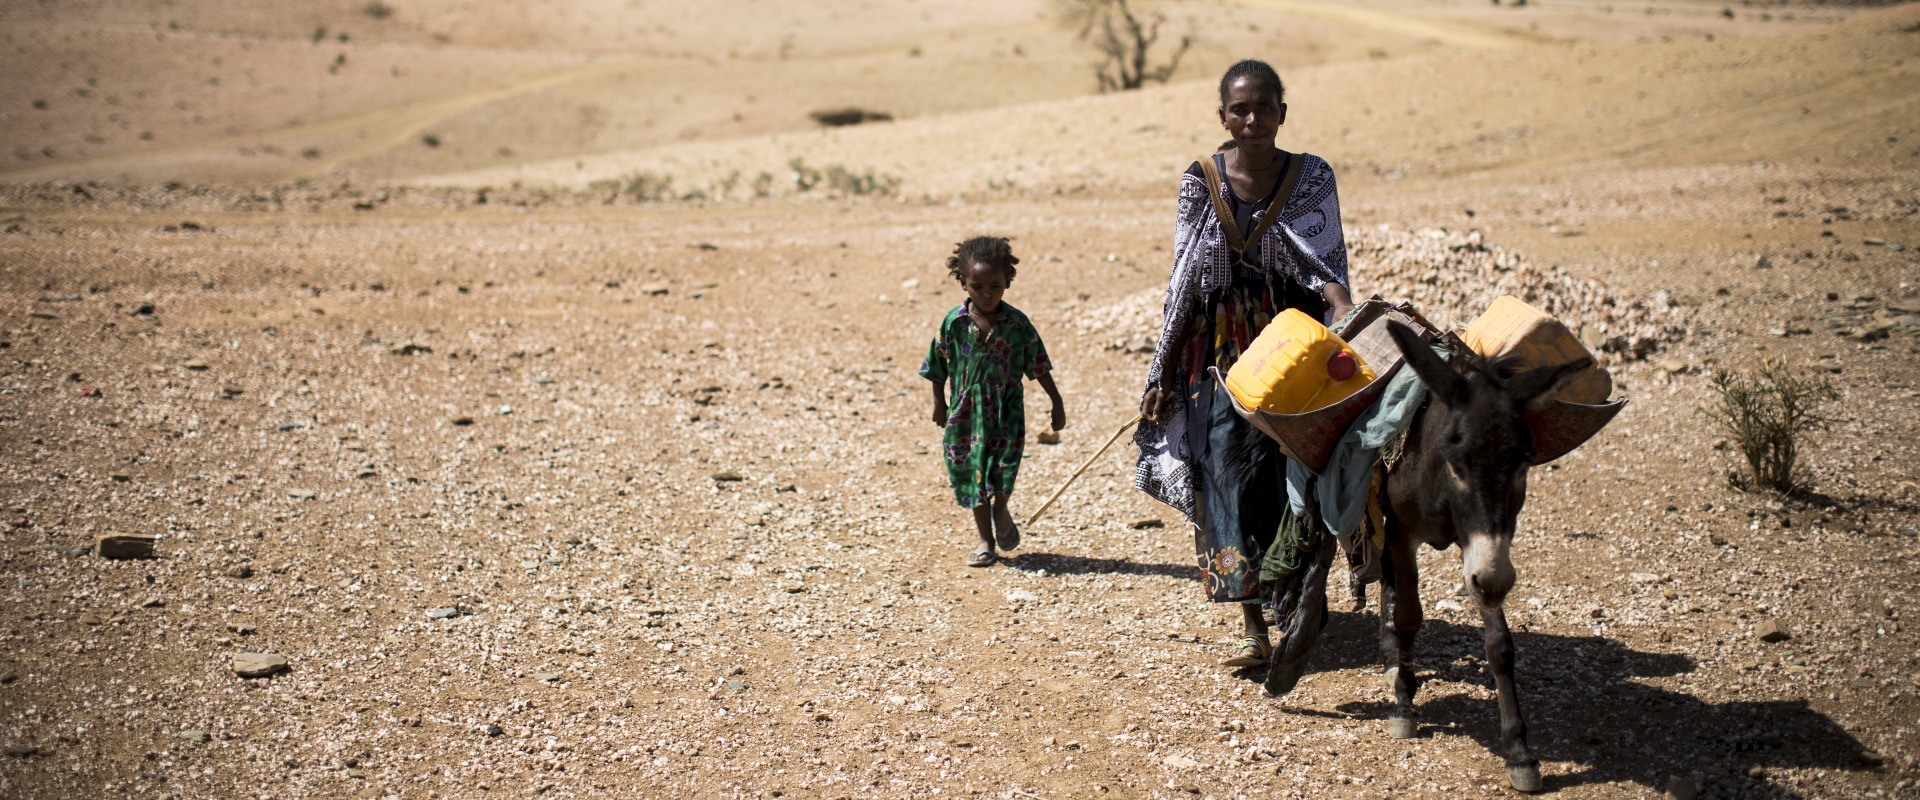 Drought is particularly hard on herding and farming families, who depend on land and livestock to survive.